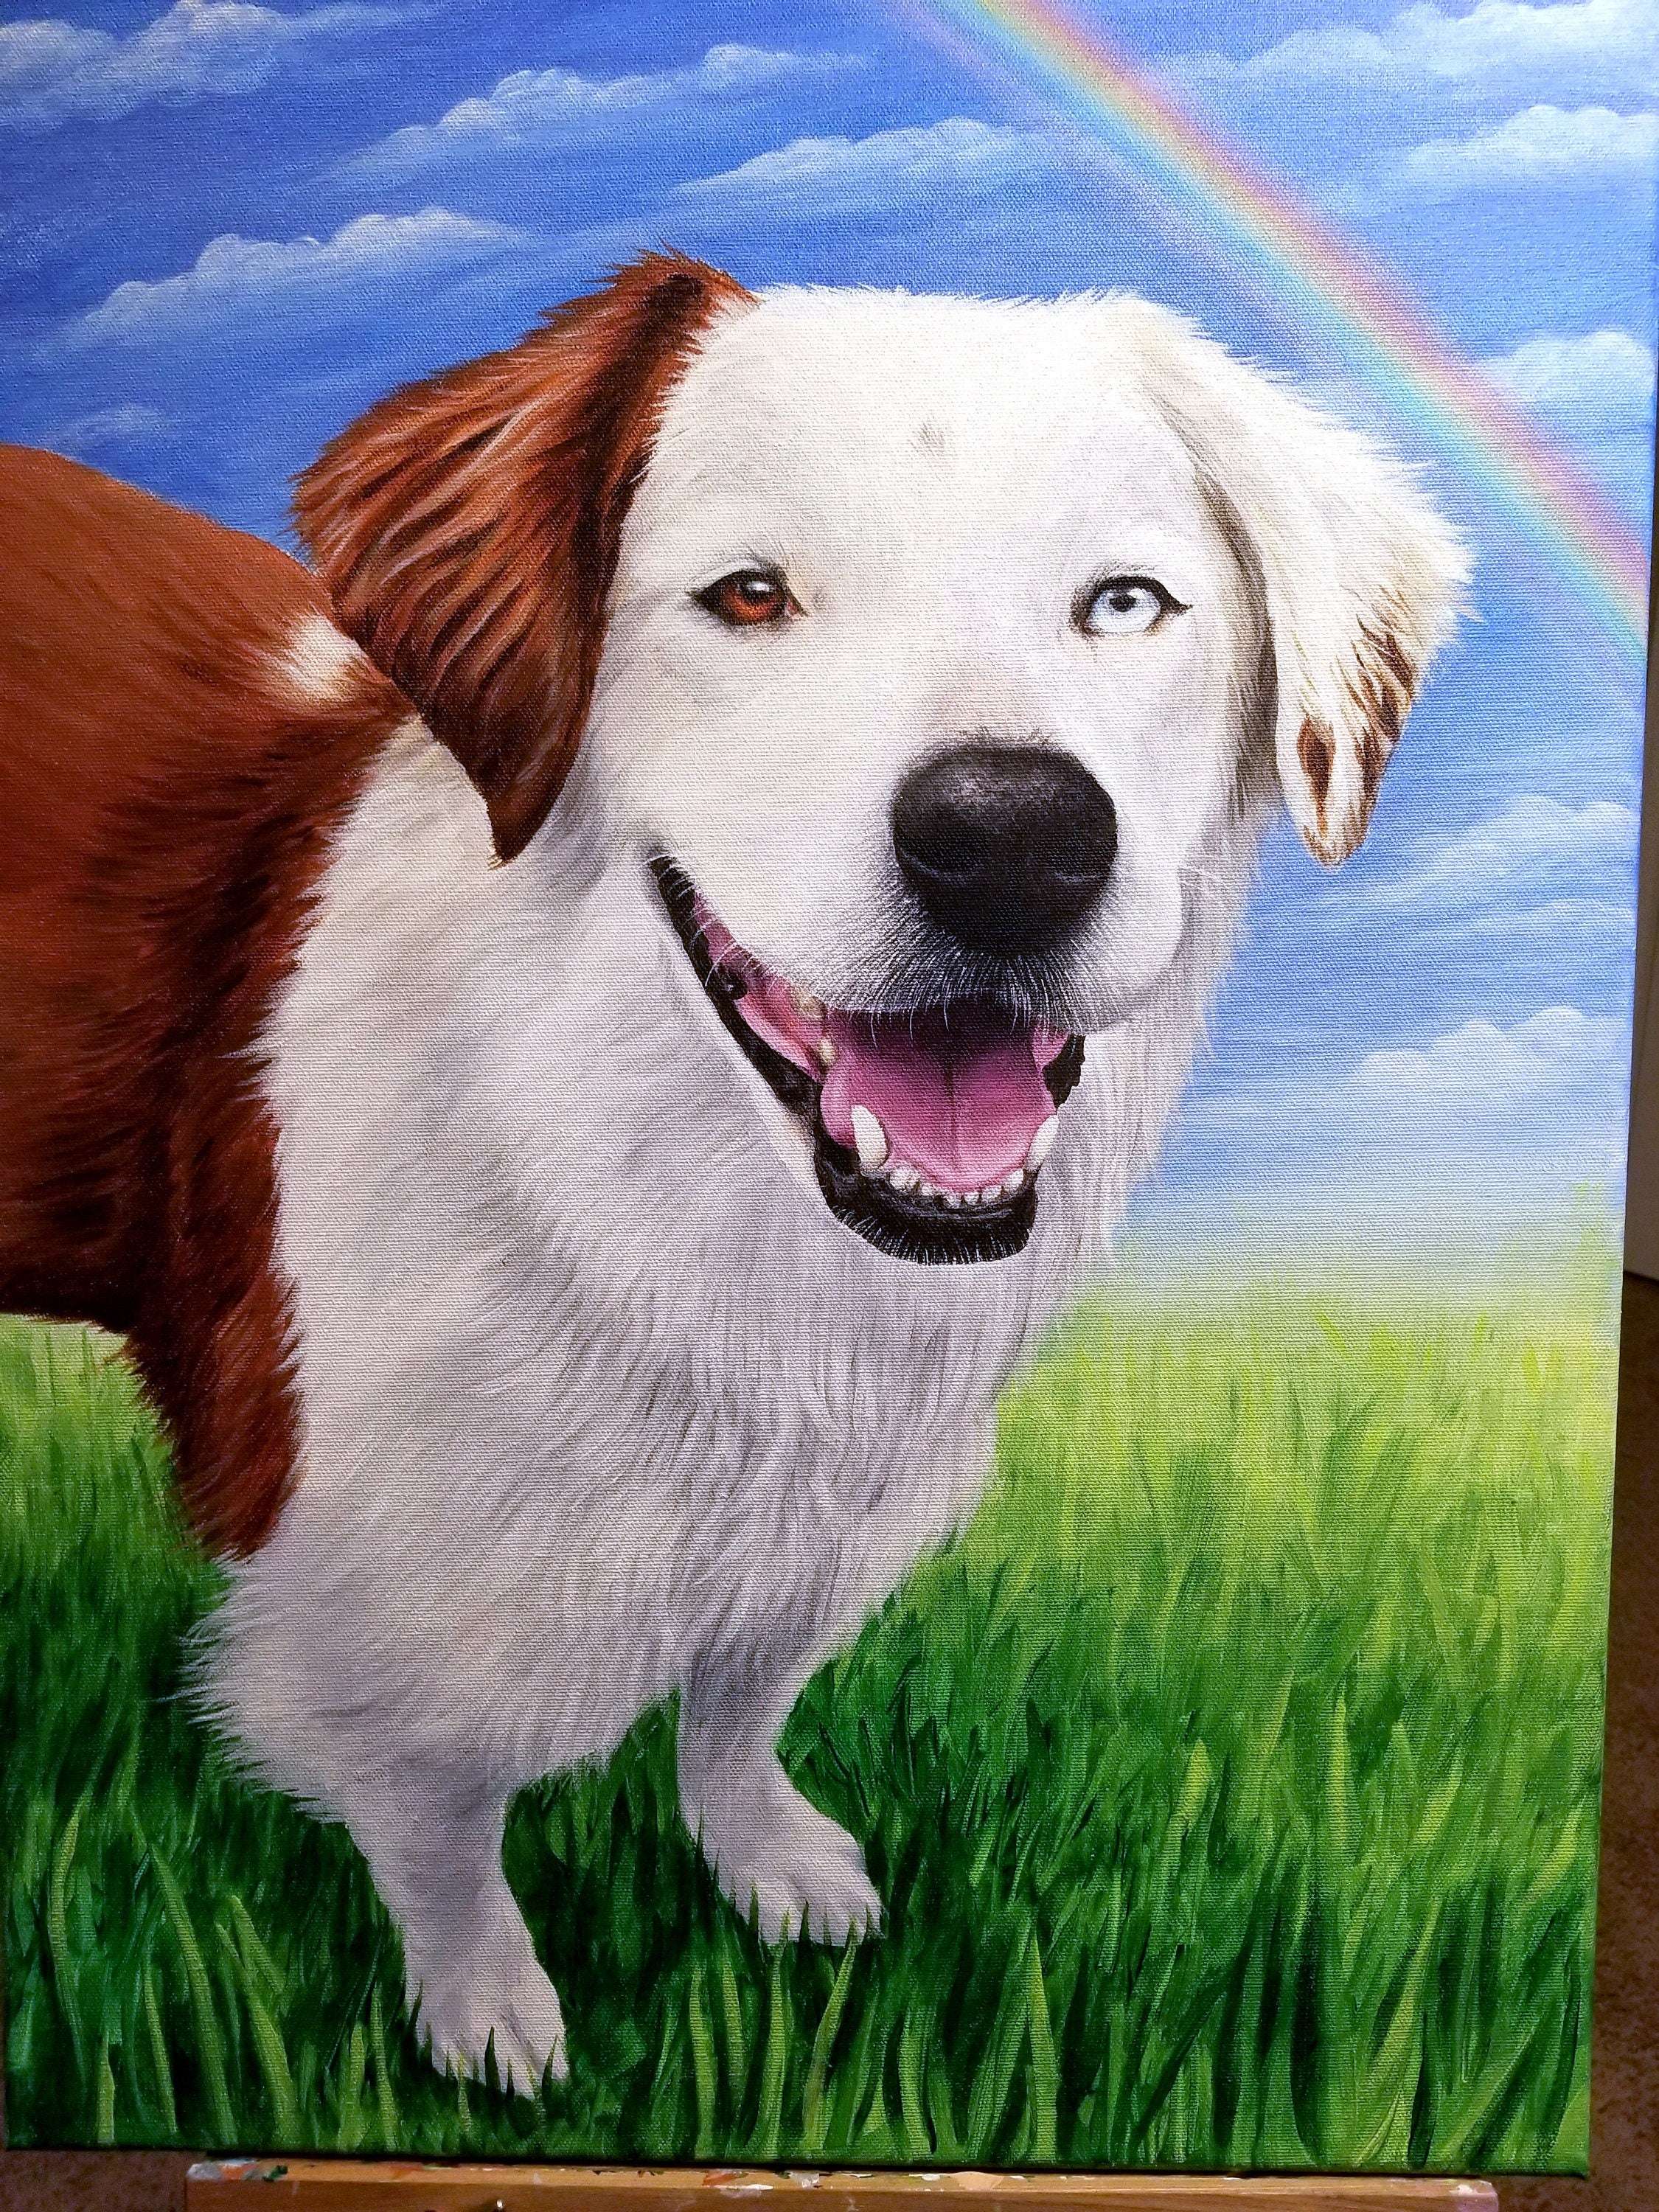 Joyful memorial pet portrait painting of a white and brown dog in a grassy field with a rainbow bridge in the sky.